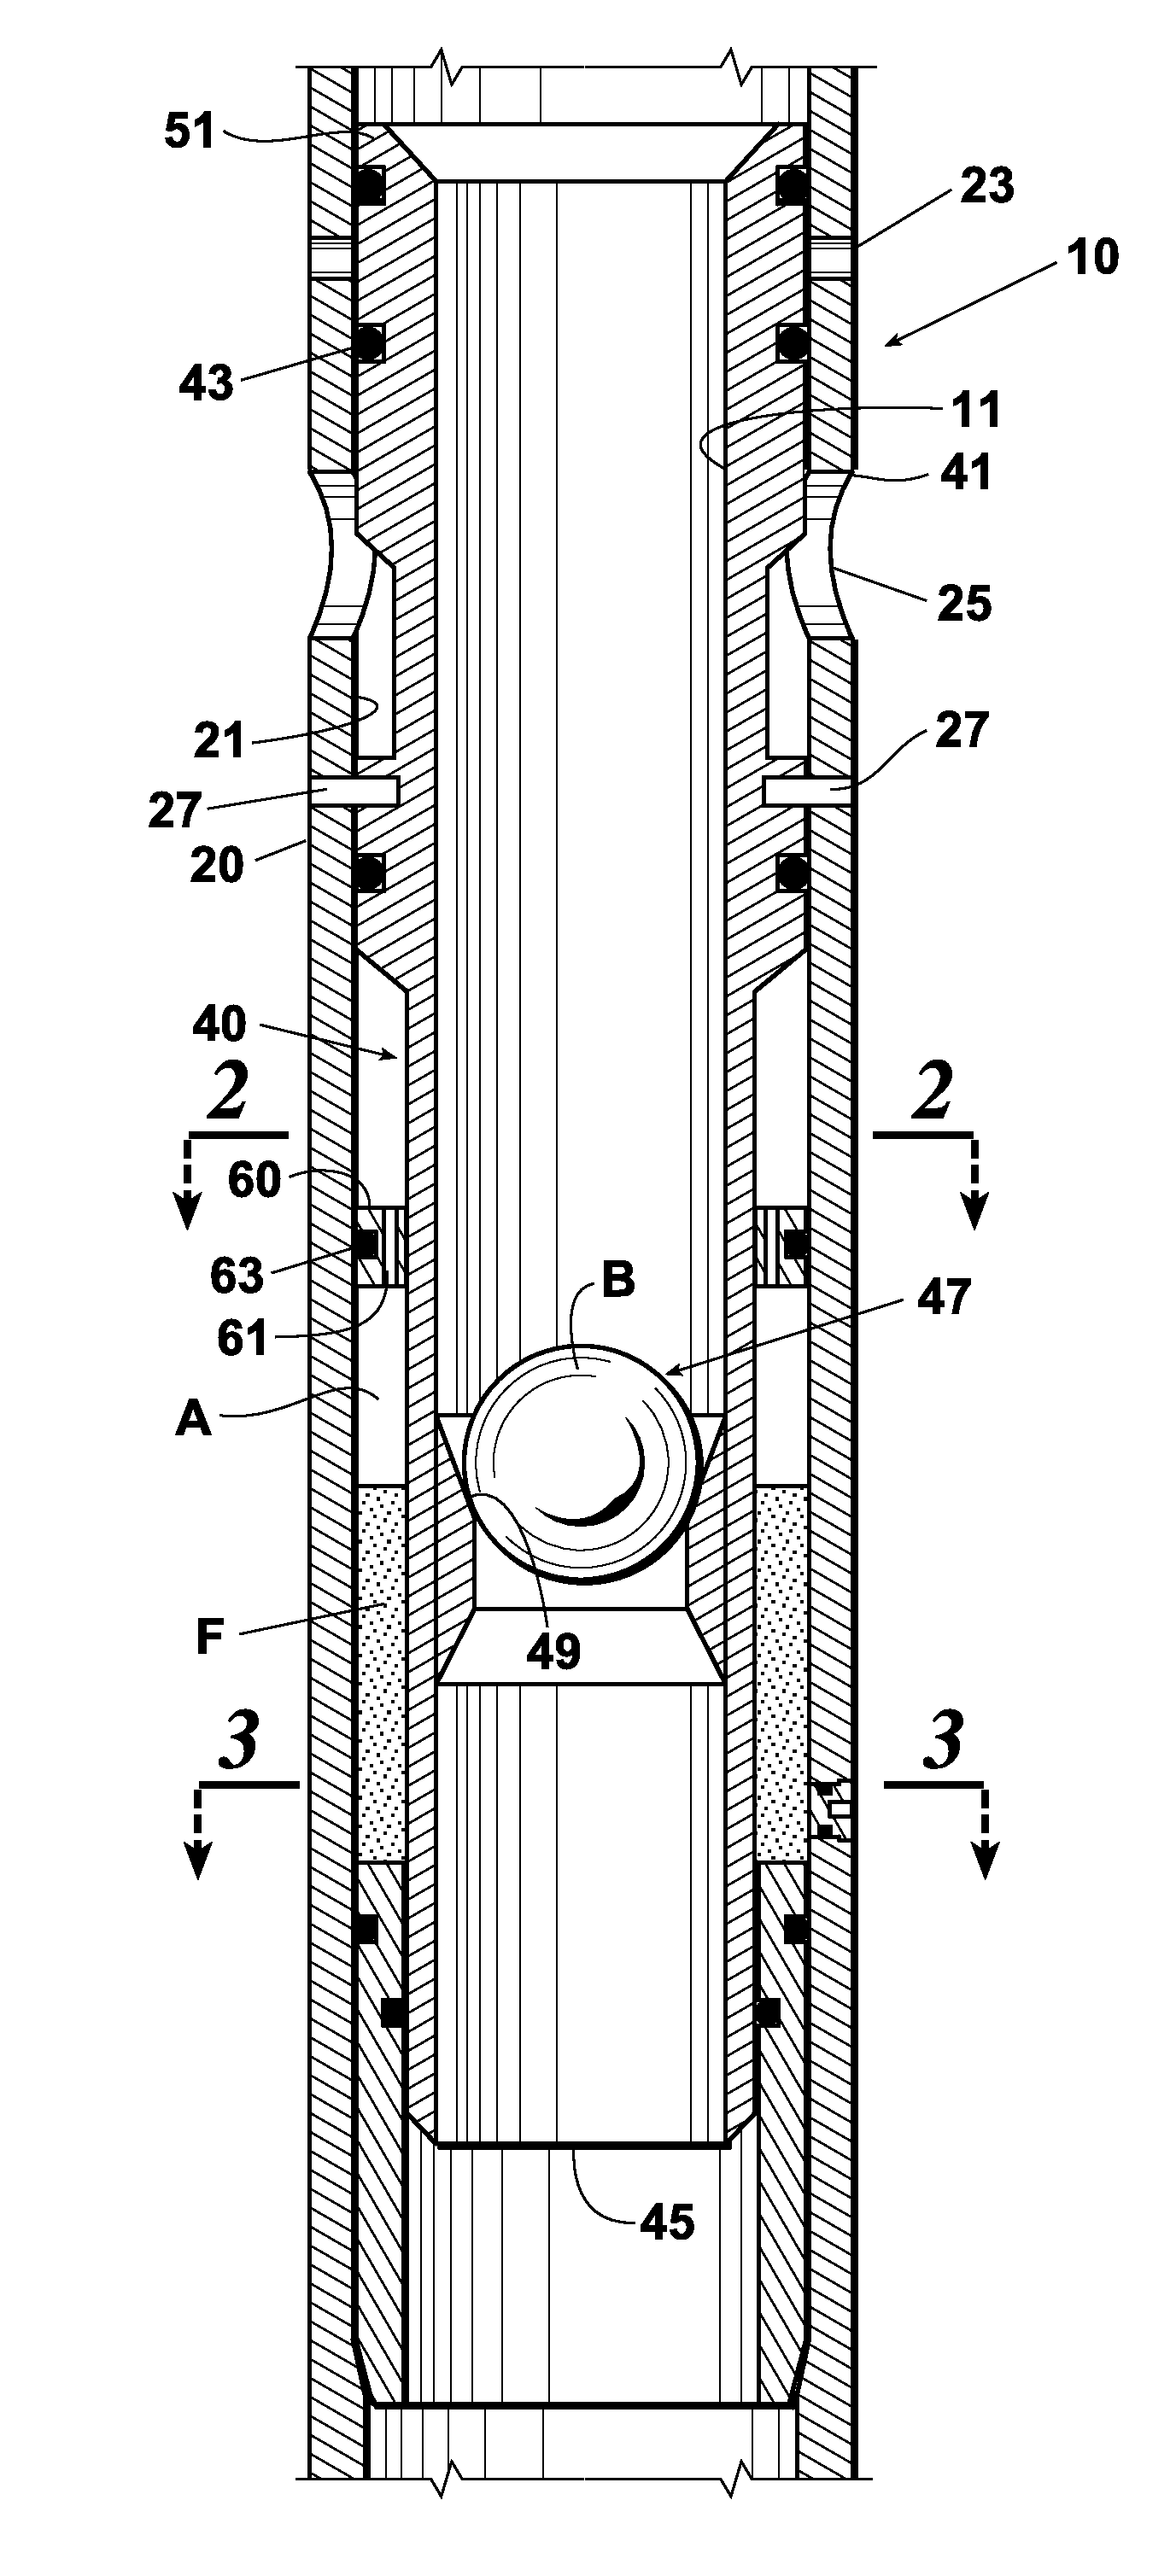 Pressure response fracture port tool for use in hydraulic fracturing applications